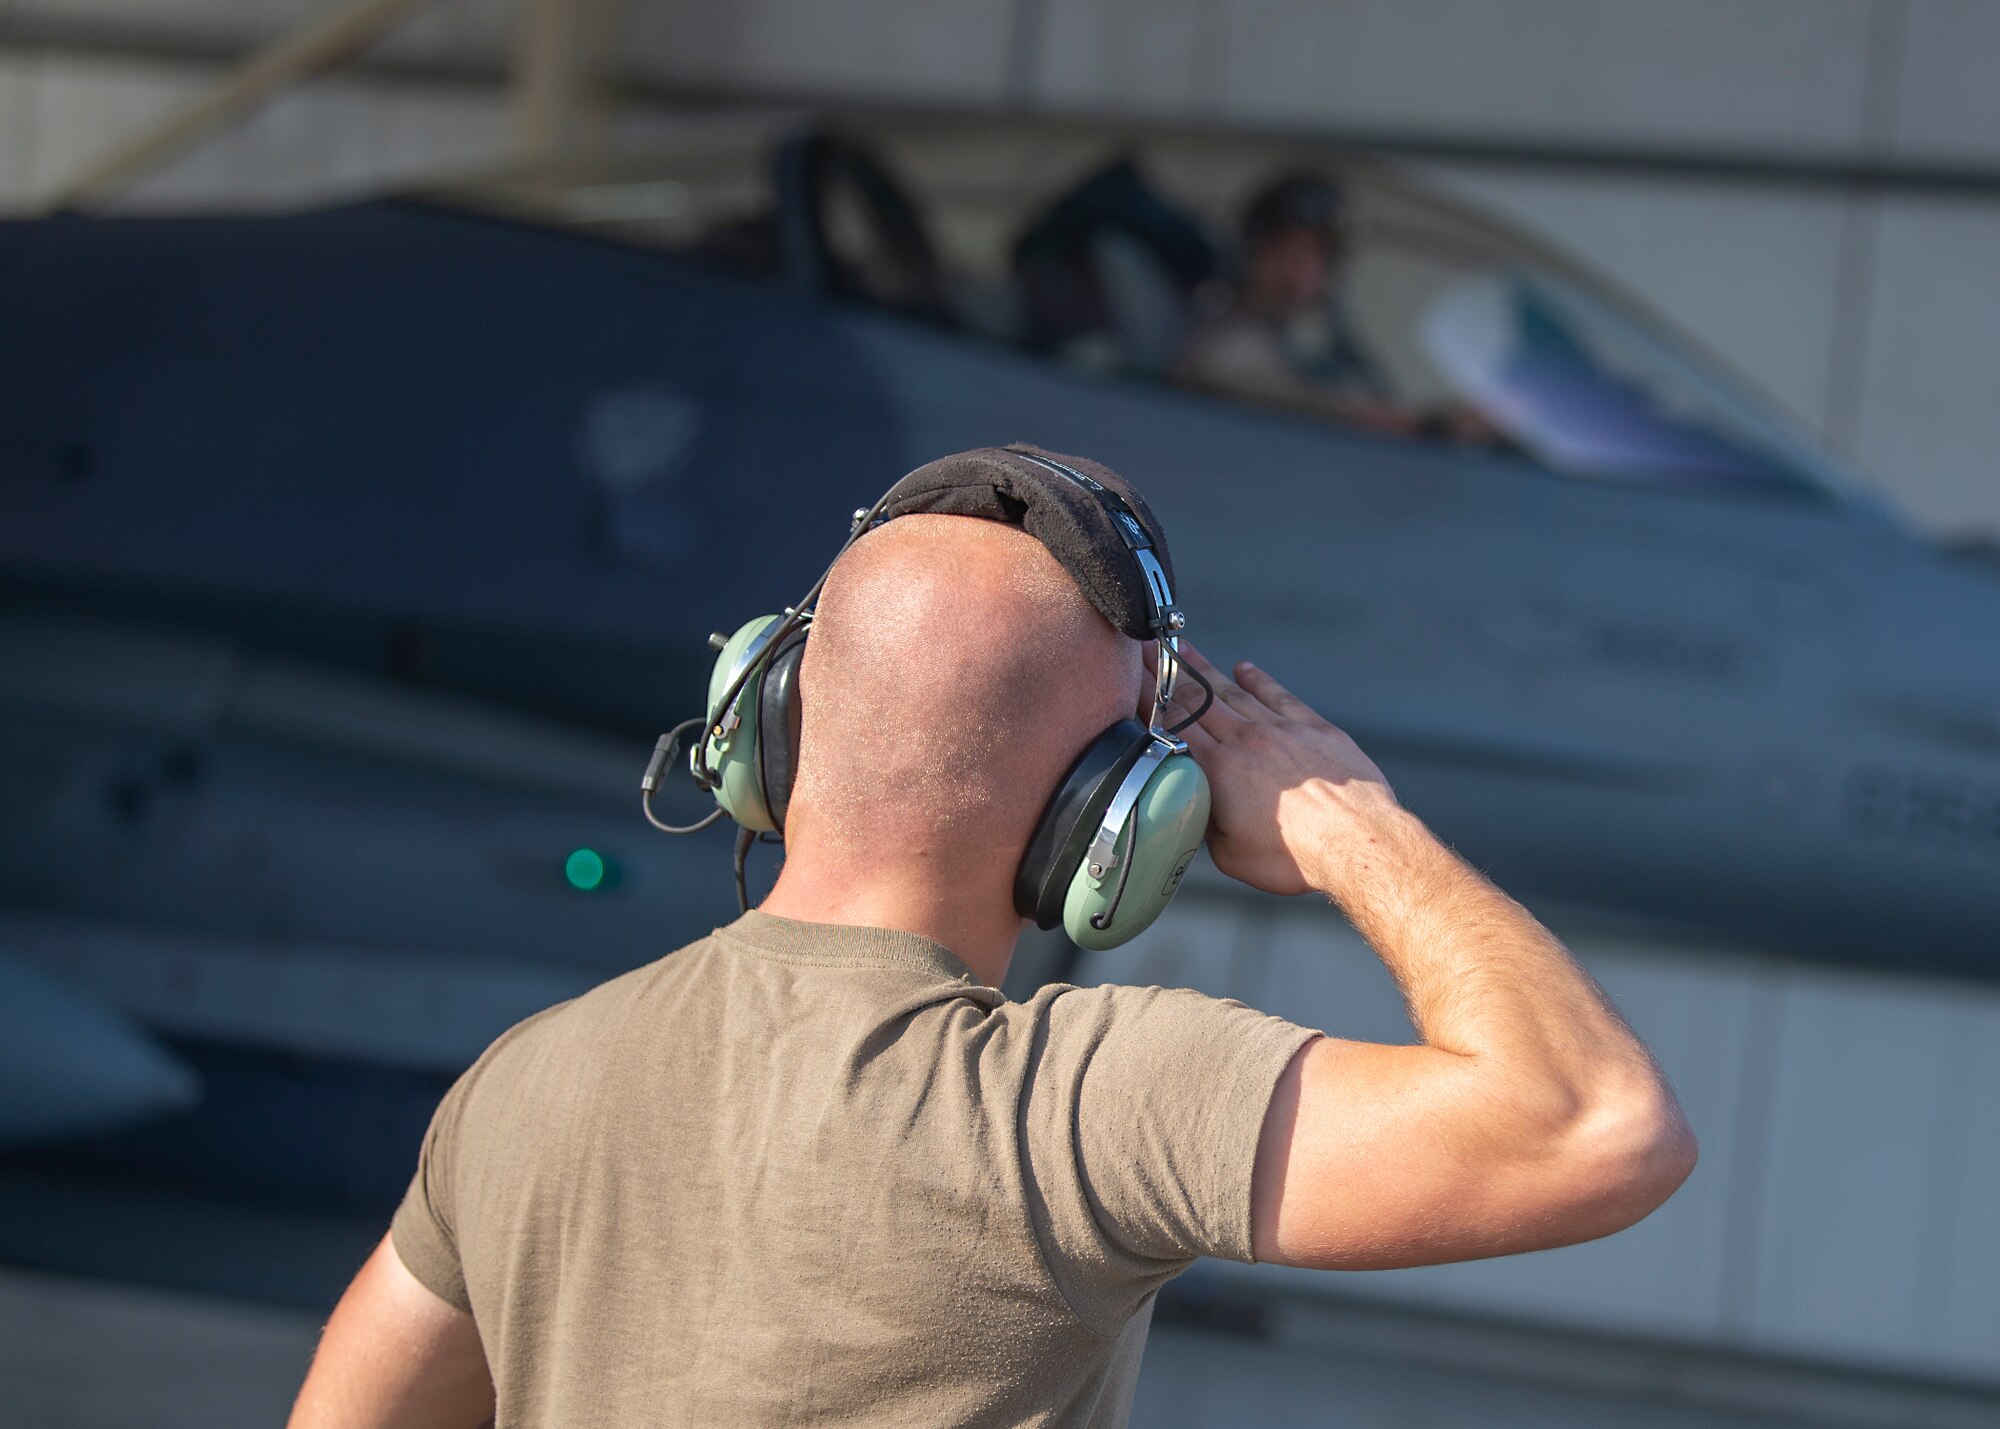 Deployed aircraft maintainers enable 'dynamic force employment'